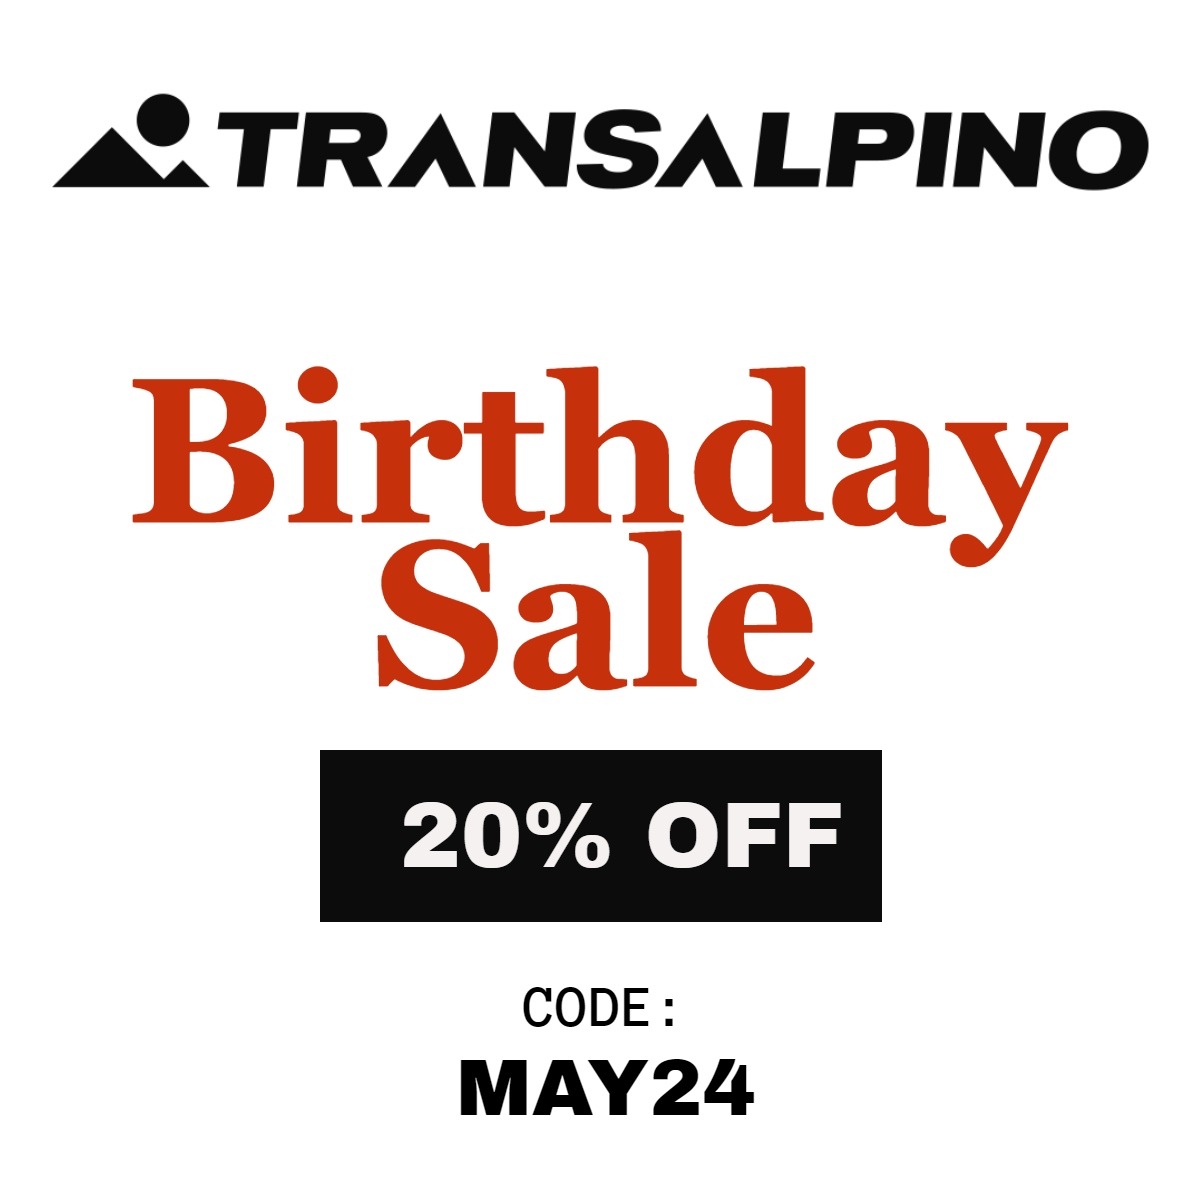 Birthday Flash Sale Now On Key in 'MAY24' at checkout for a 20% discount. transalpino.co.uk